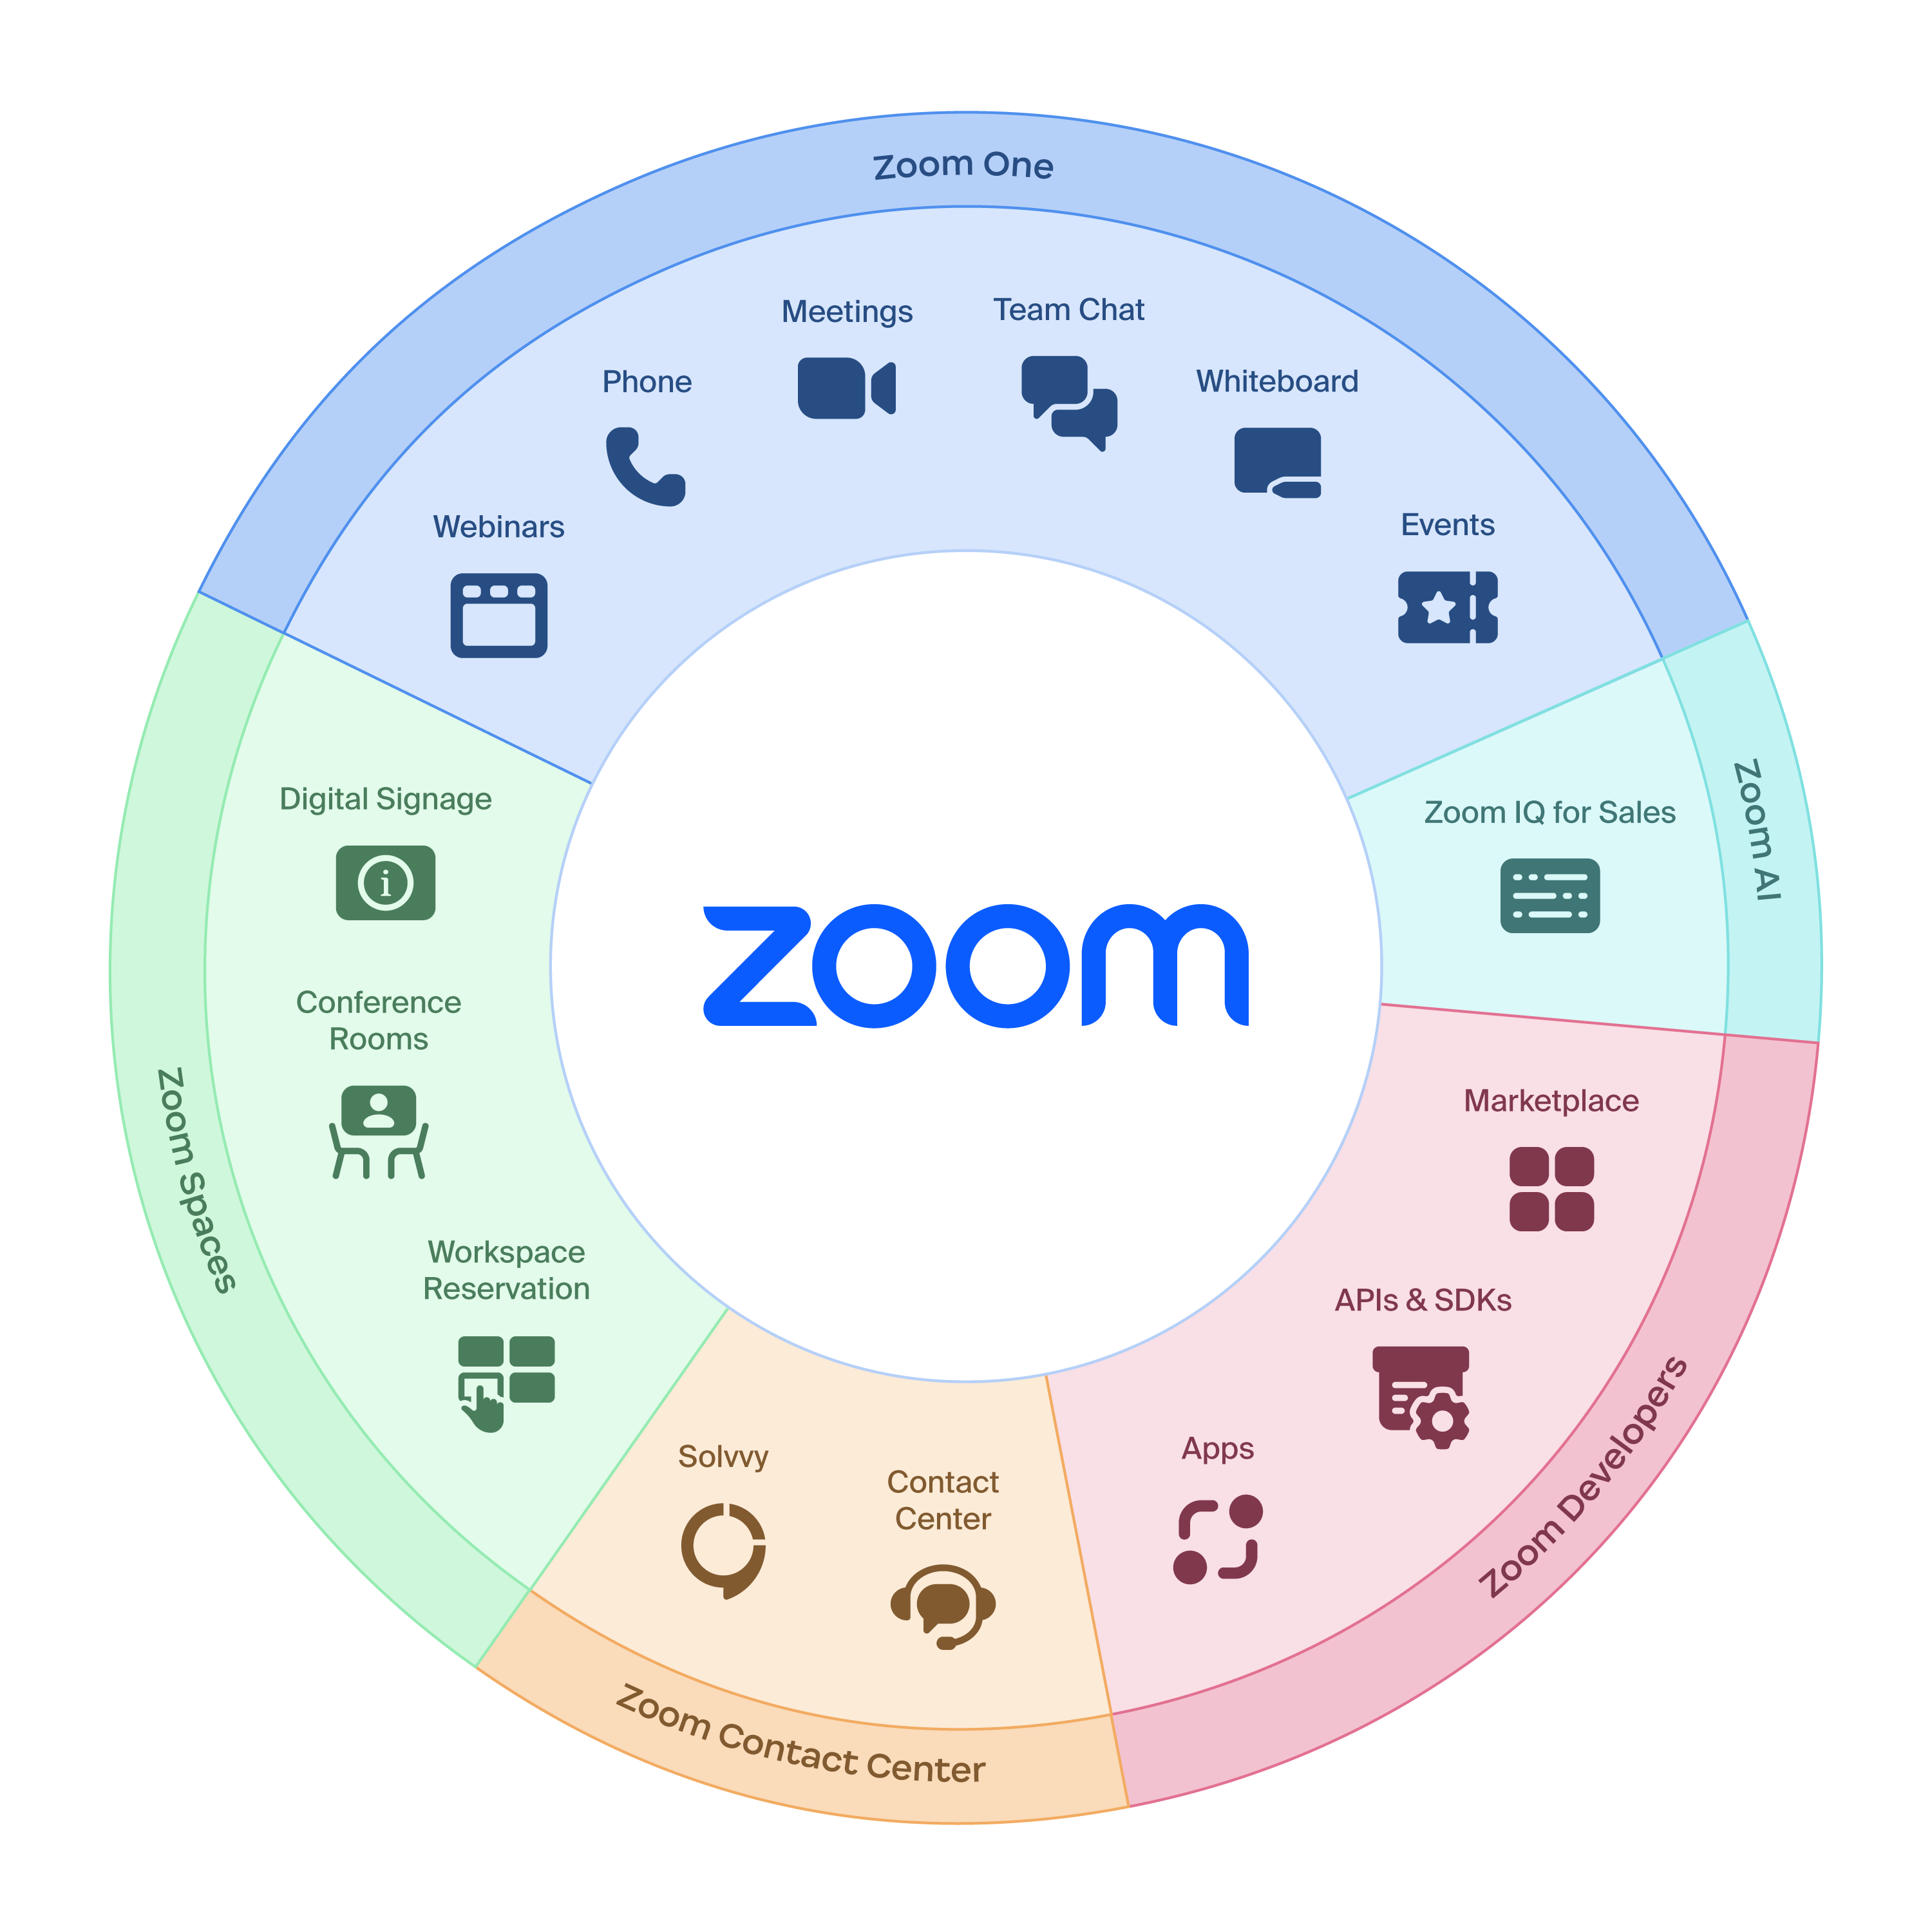 Stop by the Zoom booth for a live demo